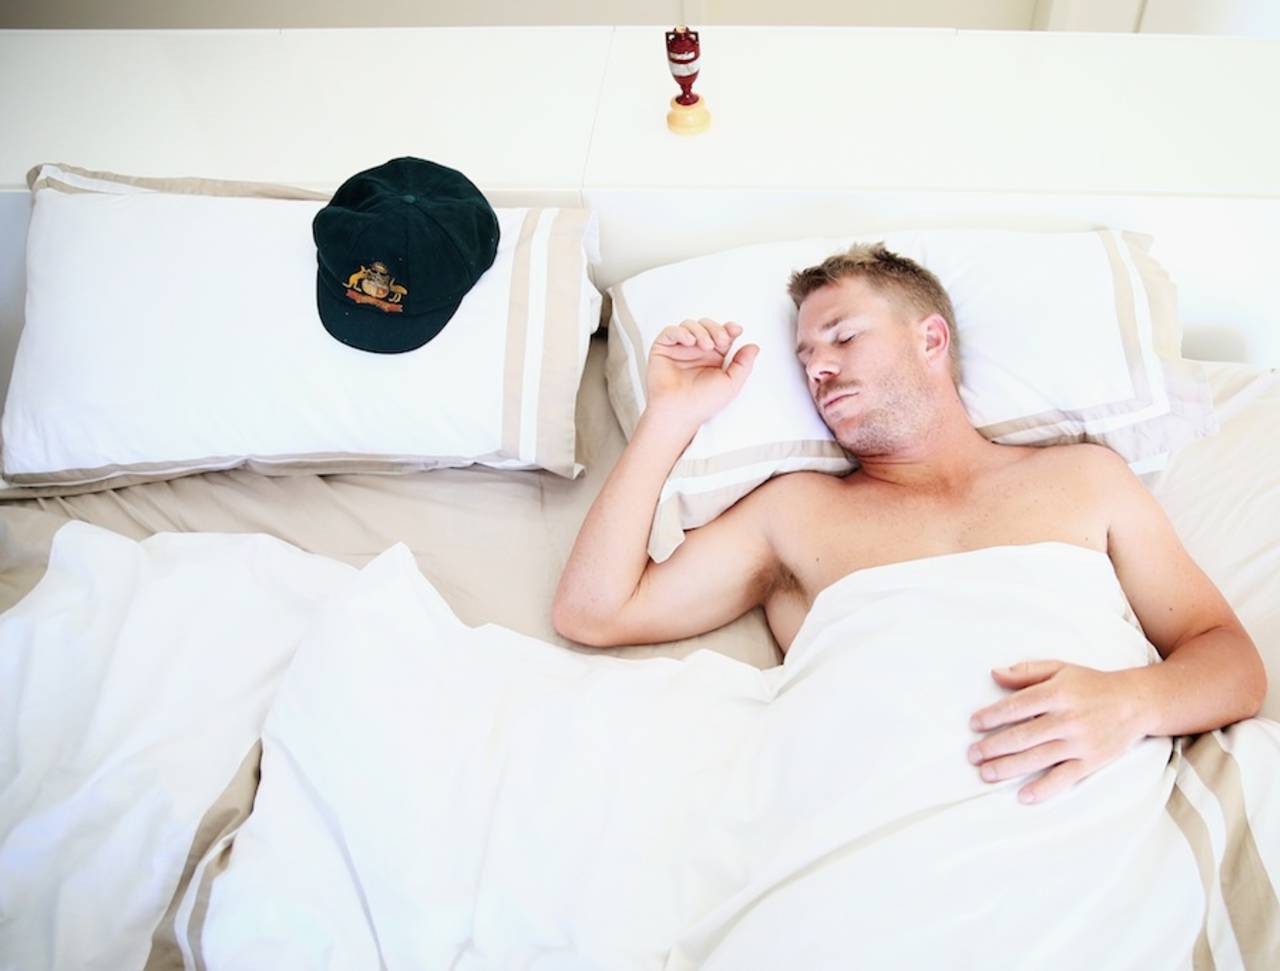 David Warner at a photo shoot in his home, the morning after Australia won the Ashes 5-0, Sydney, January 6, 2014